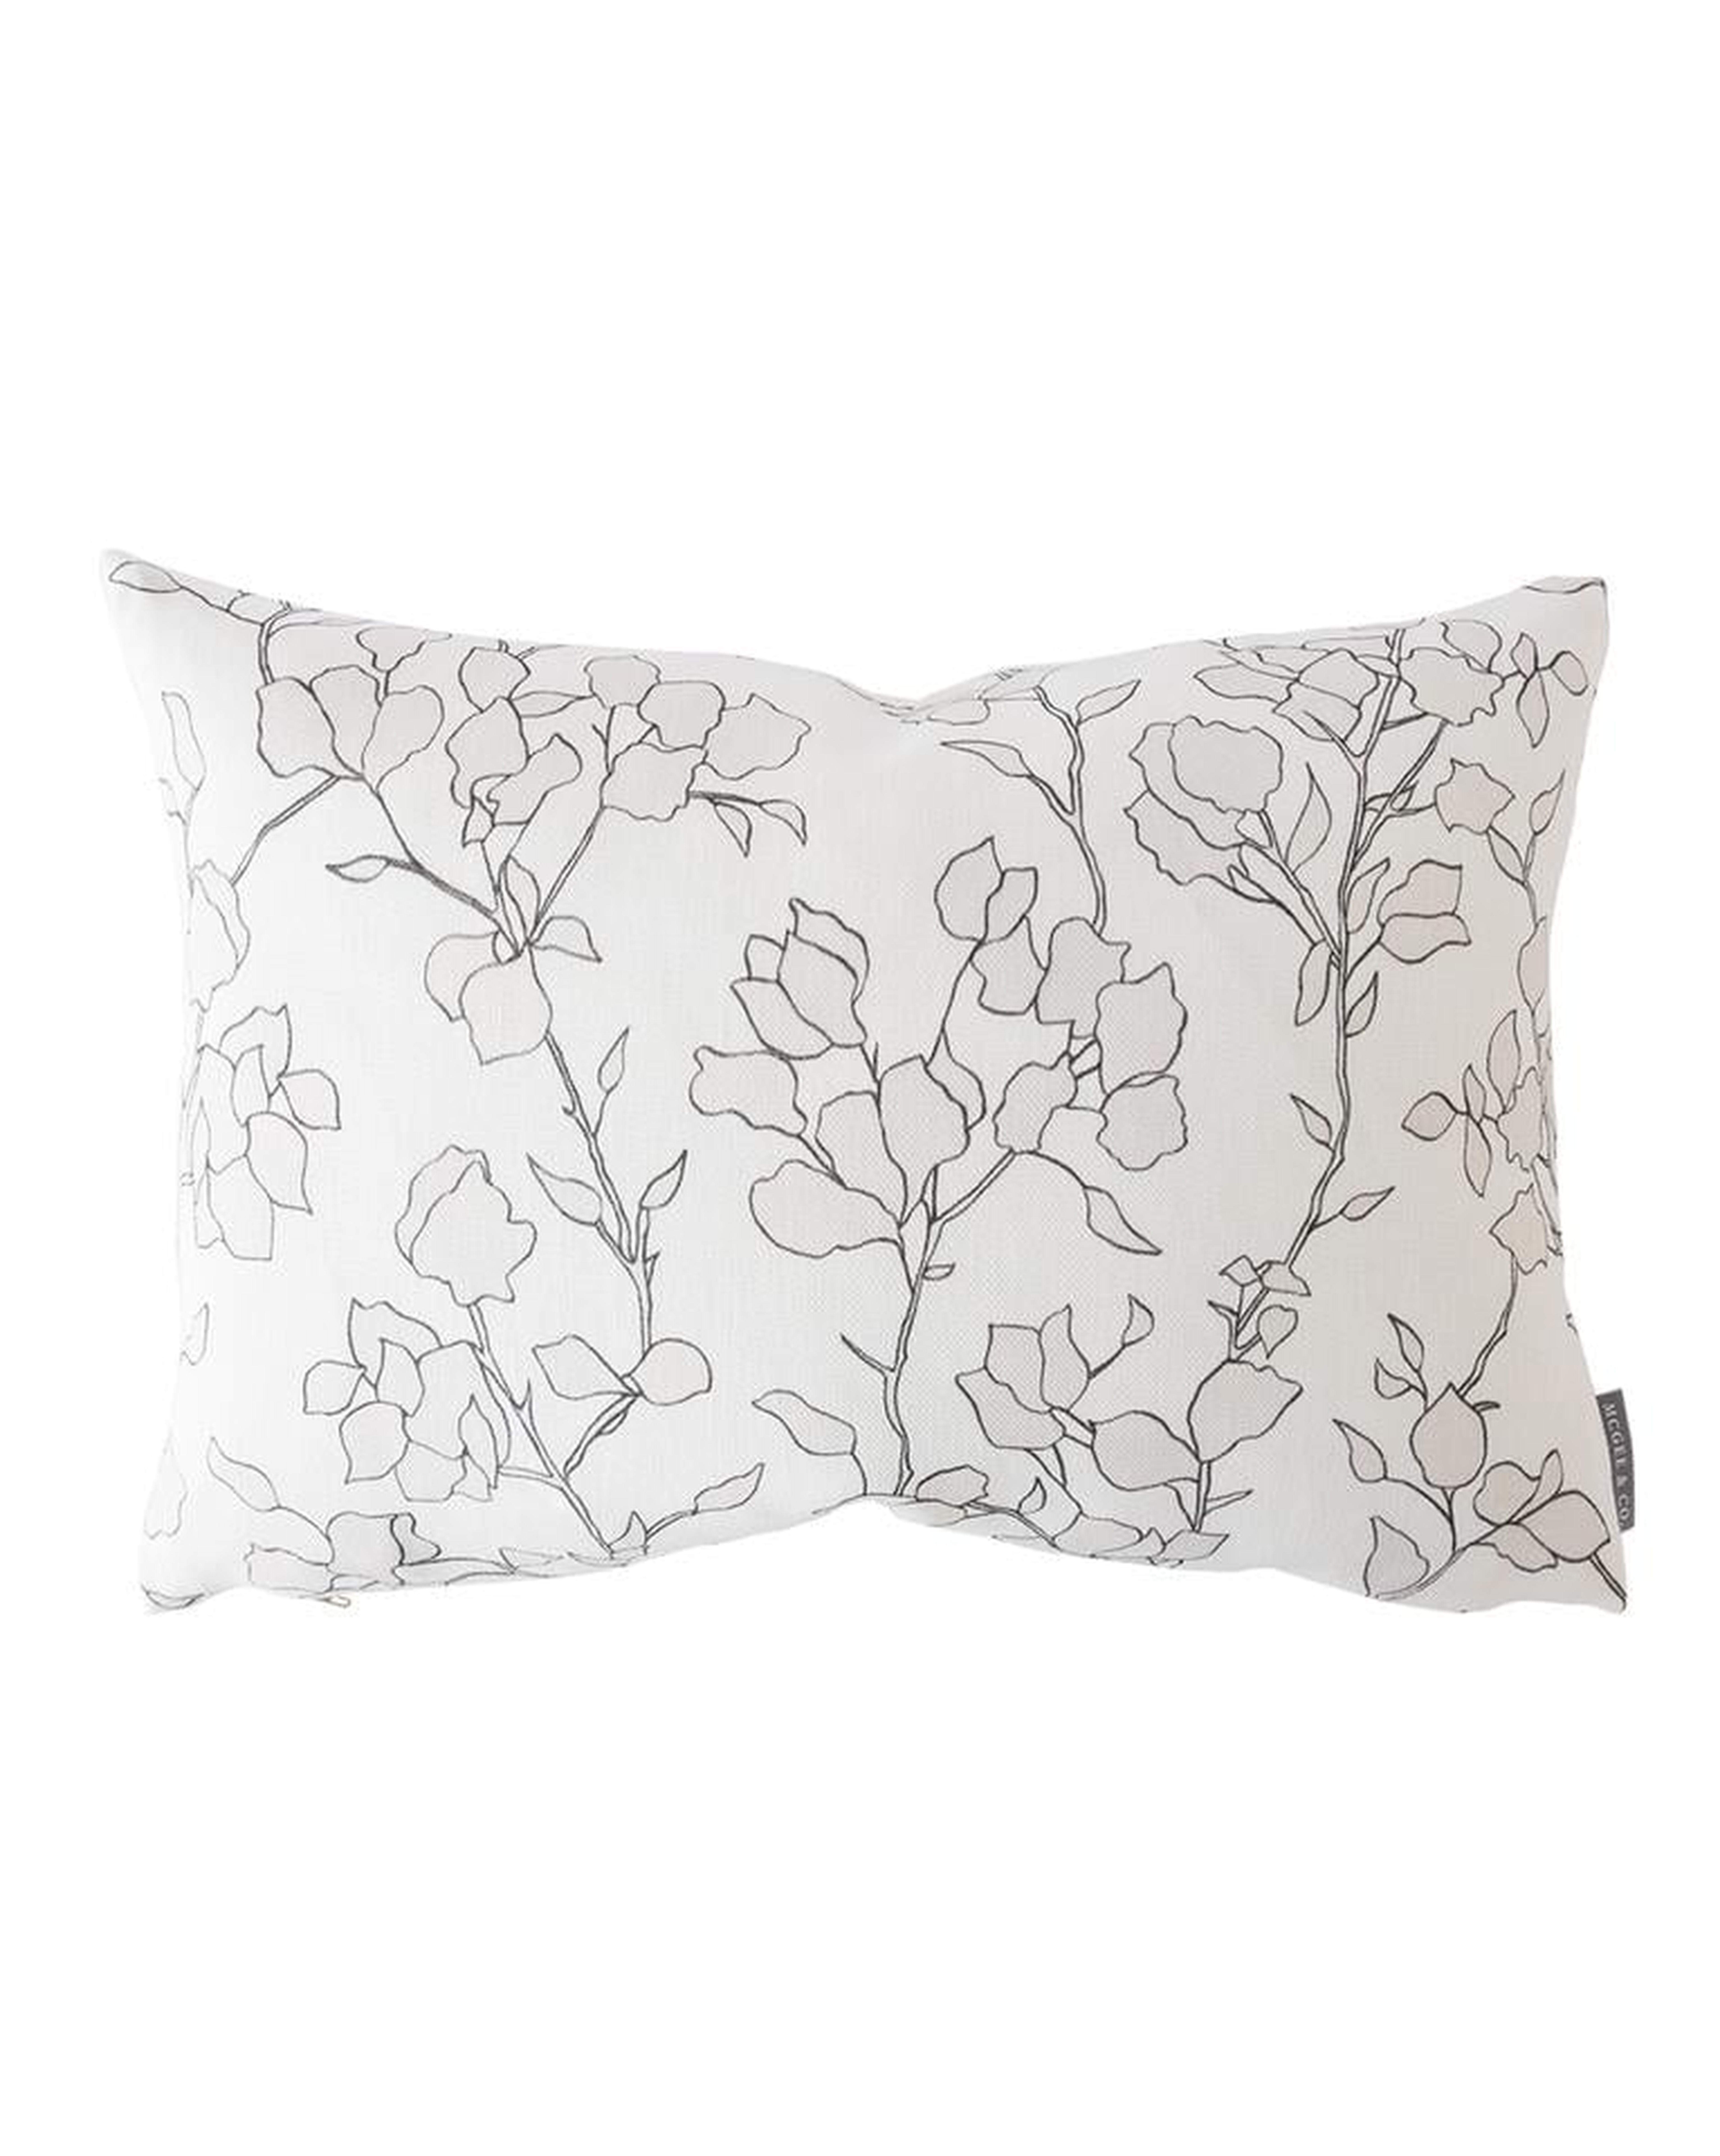 BLAIR SKETCHED FLORAL PILLOW COVER WITHOUT INSERT, 12" x 24" - McGee & Co.